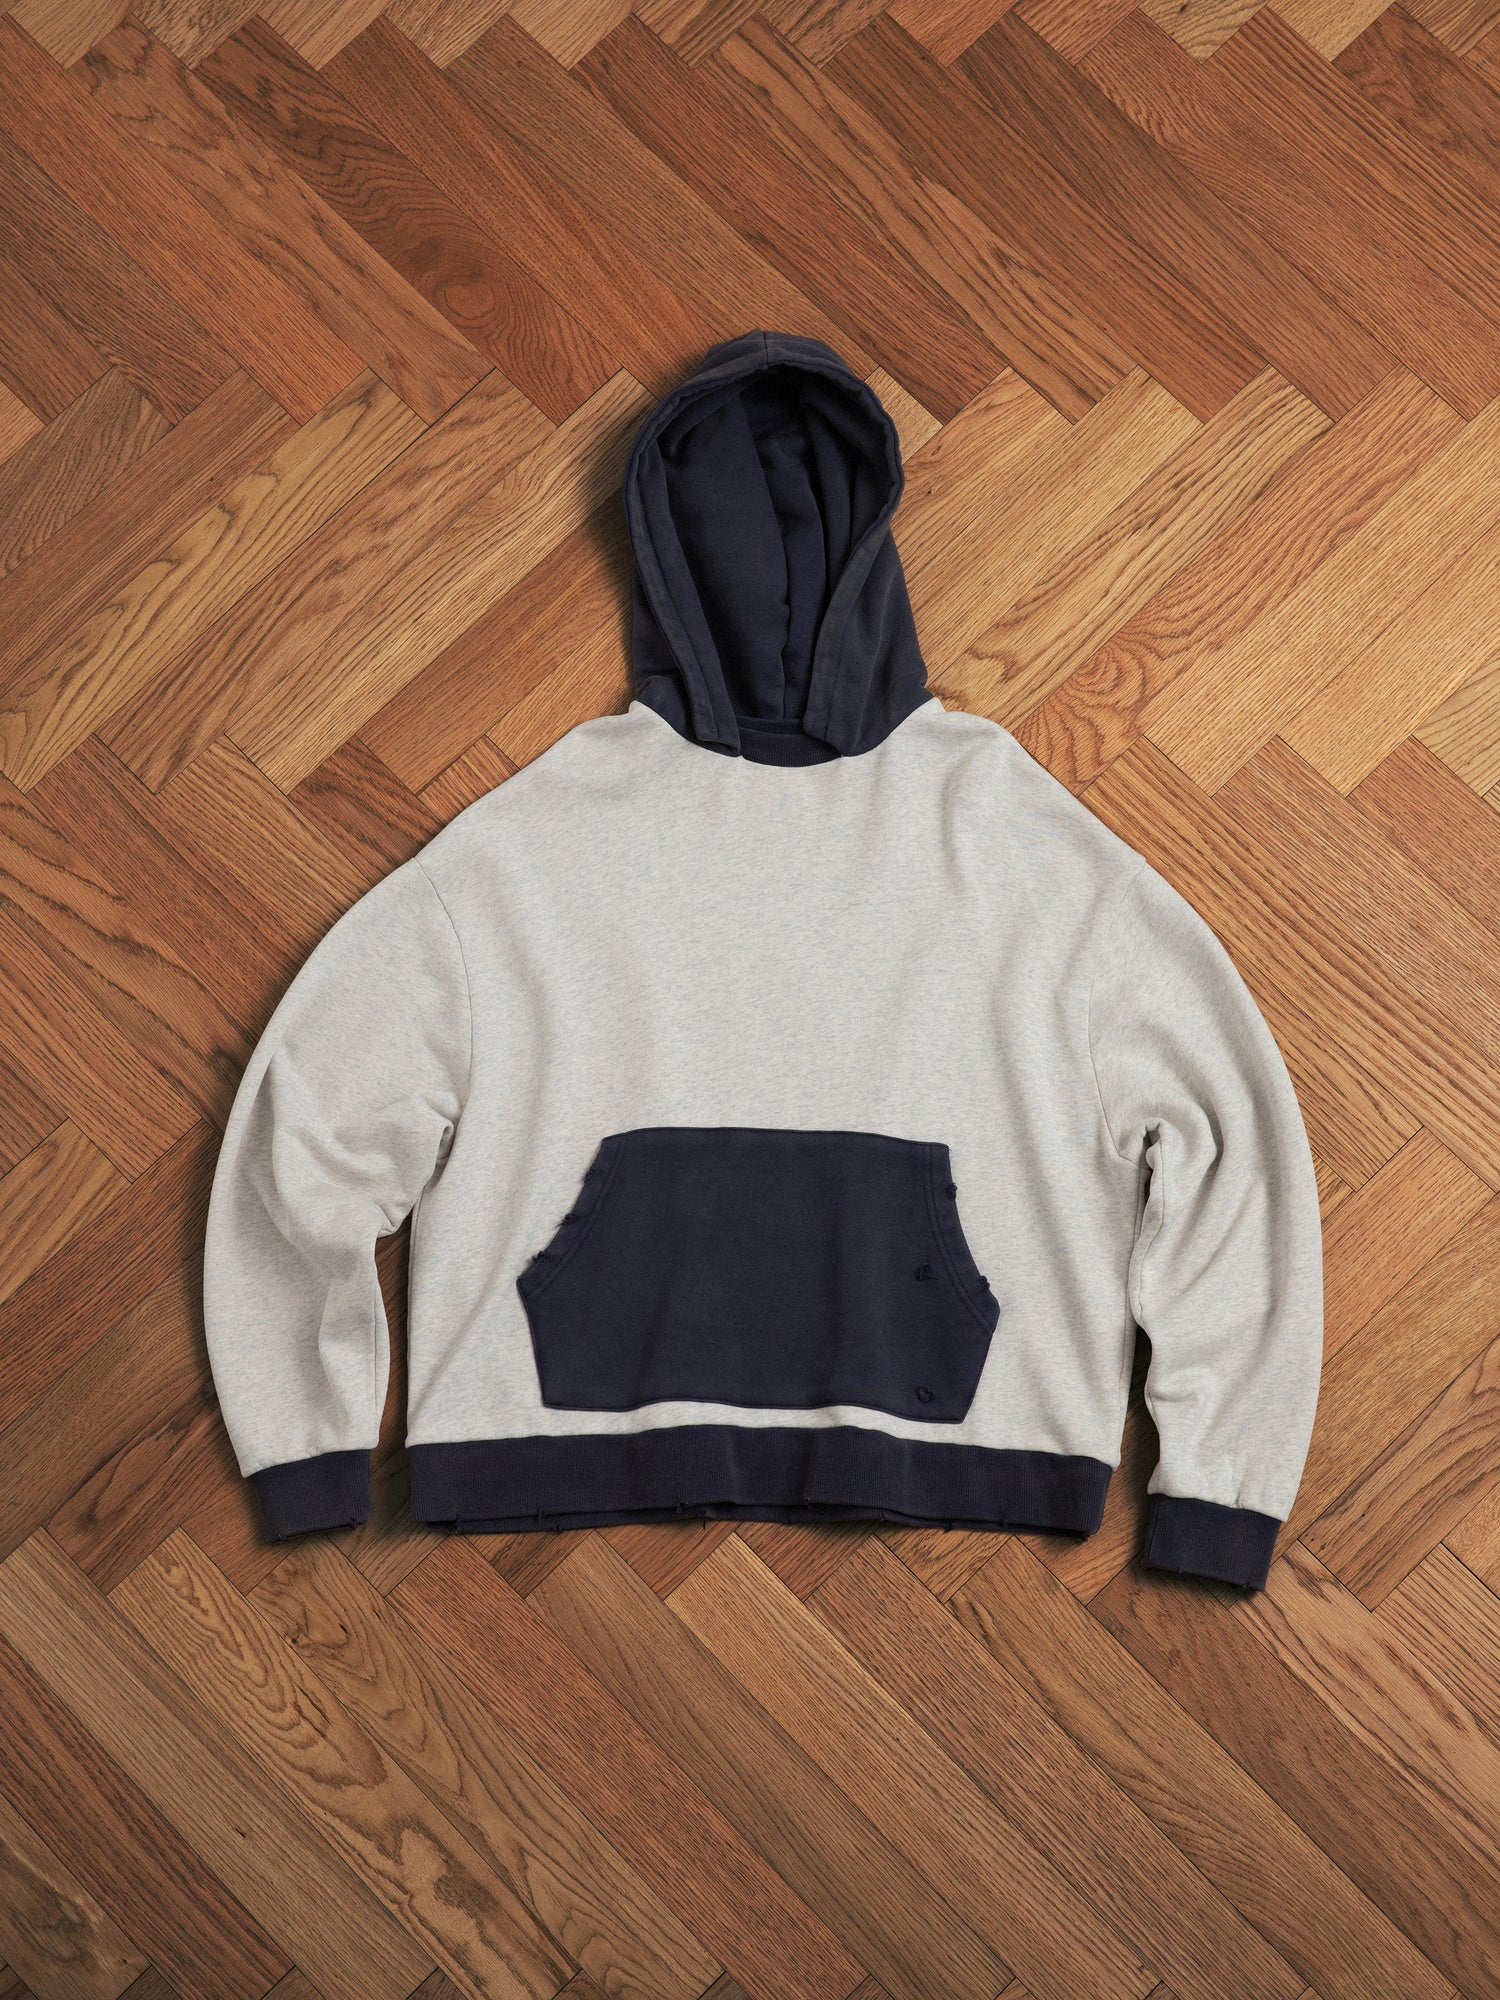 A **Found** two-tone hoodie with a pocket on a wooden floor.